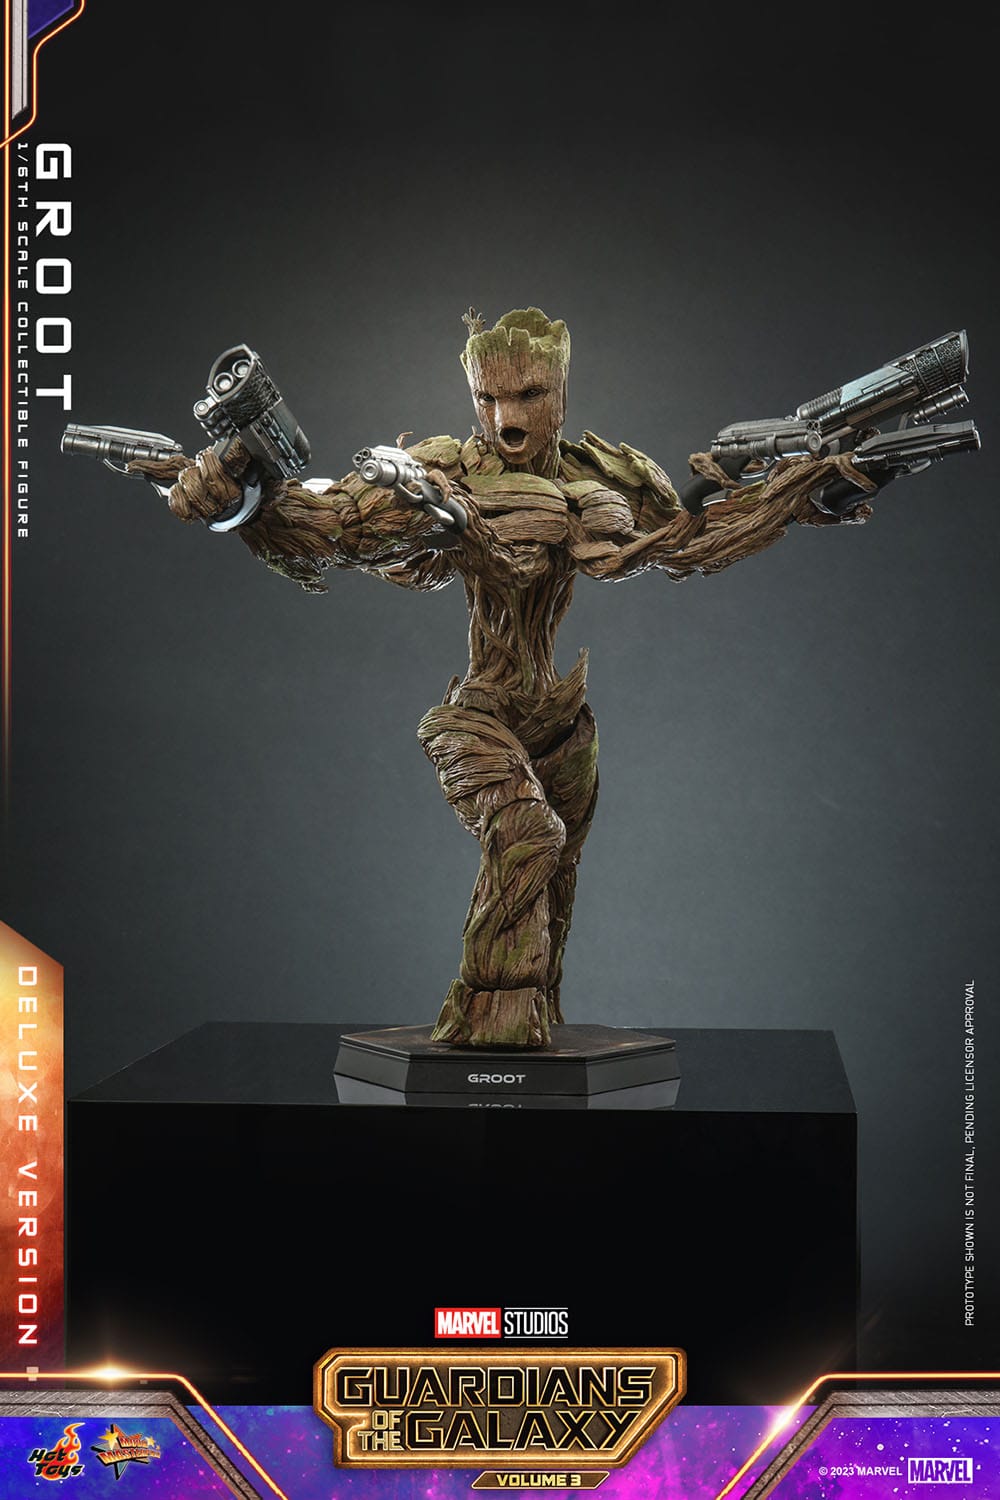 Hot Toys Guardians Of The Galaxy Vol. 3 Groot 1/6th Scale Deluxe Figure